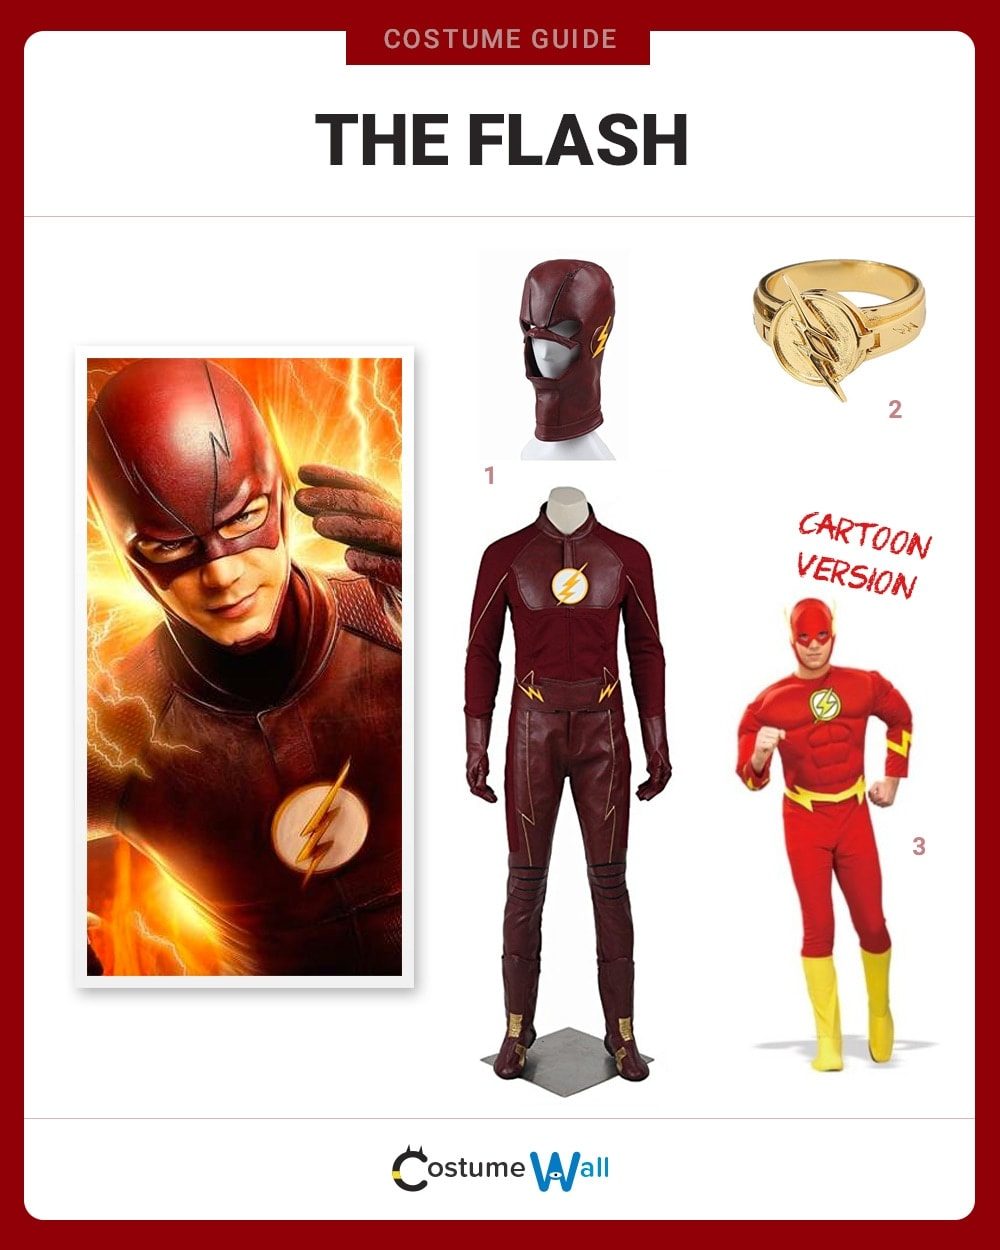 The Flash Costume Guide